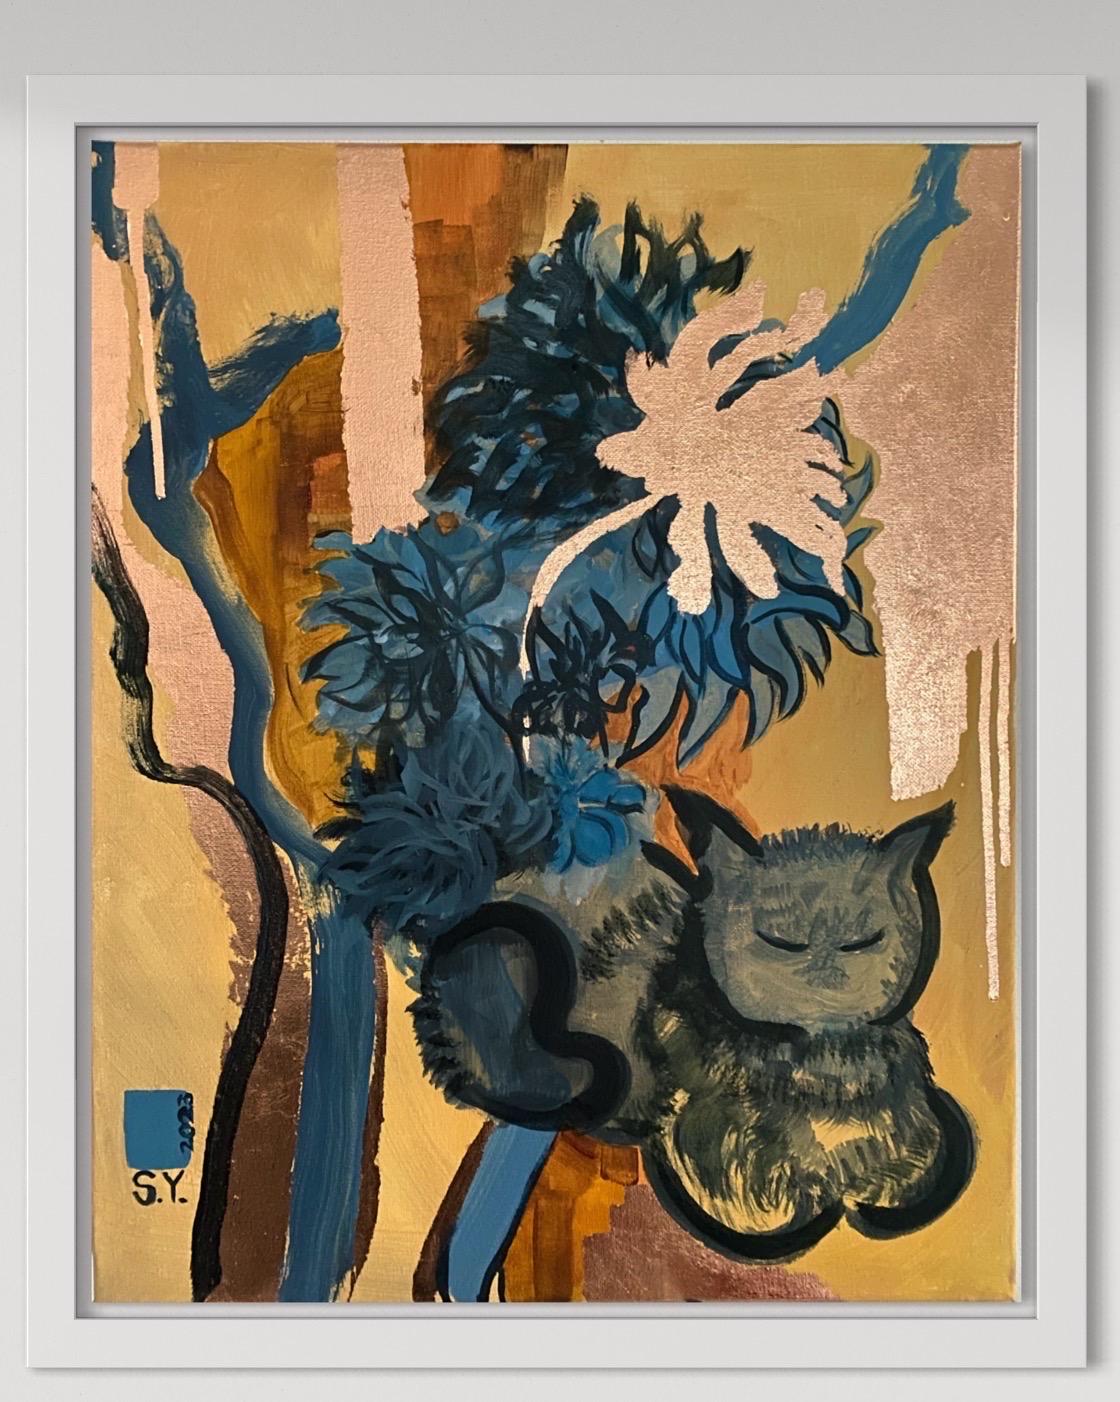 In her most recent series, 'Prayers,' Shizico incorporates Dahlias, which bloom in the autumn, bringing vibrancy to the garden even in the early winter's chill. The innocence of a cat serves as a symbol of the vitality of life, a symbol of innocence